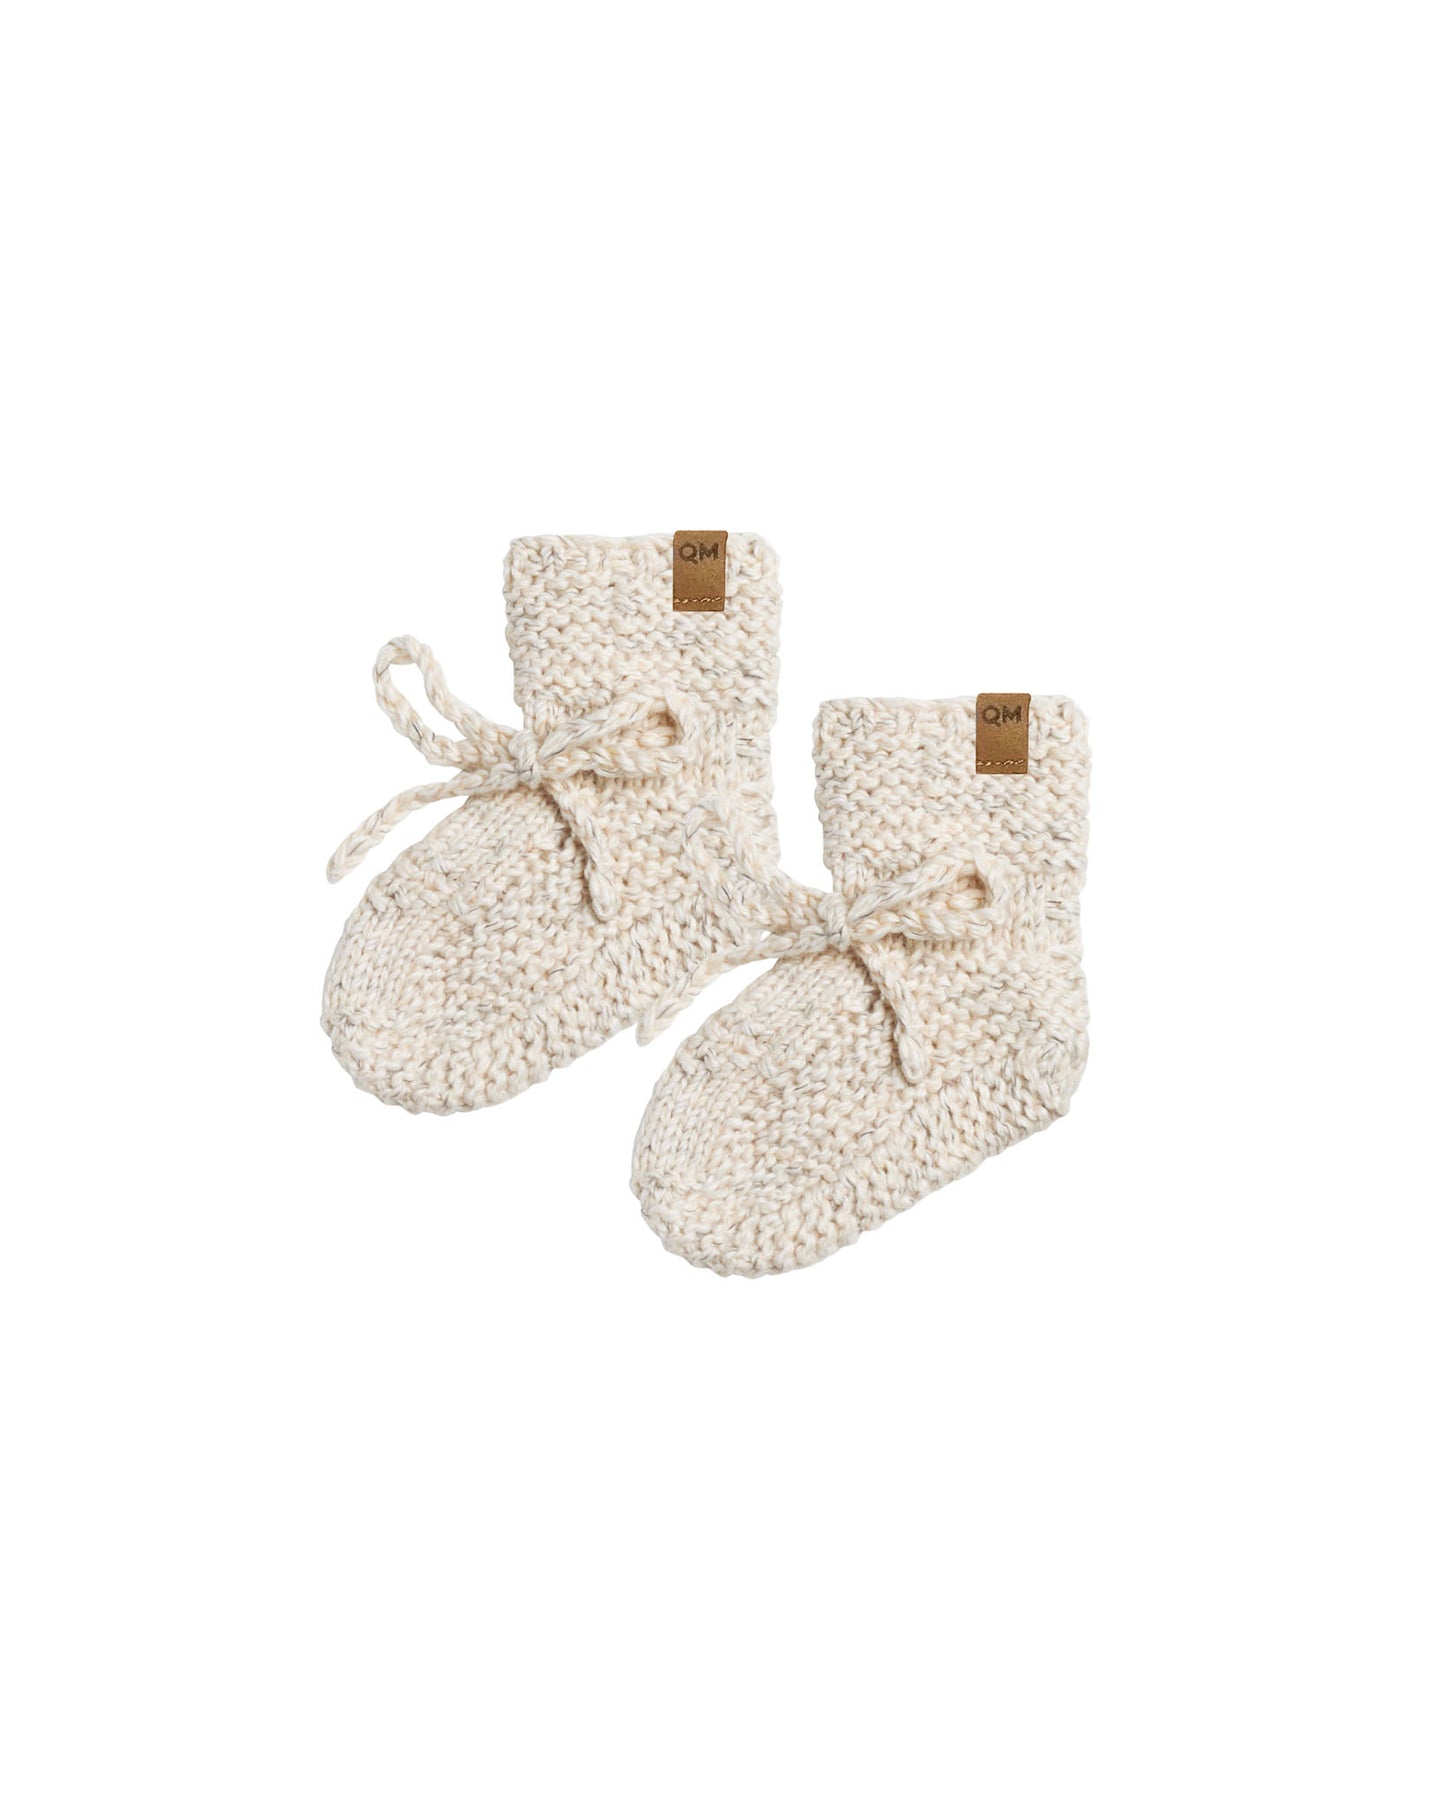 Quincy Mae Knit Booties Natural Speckled